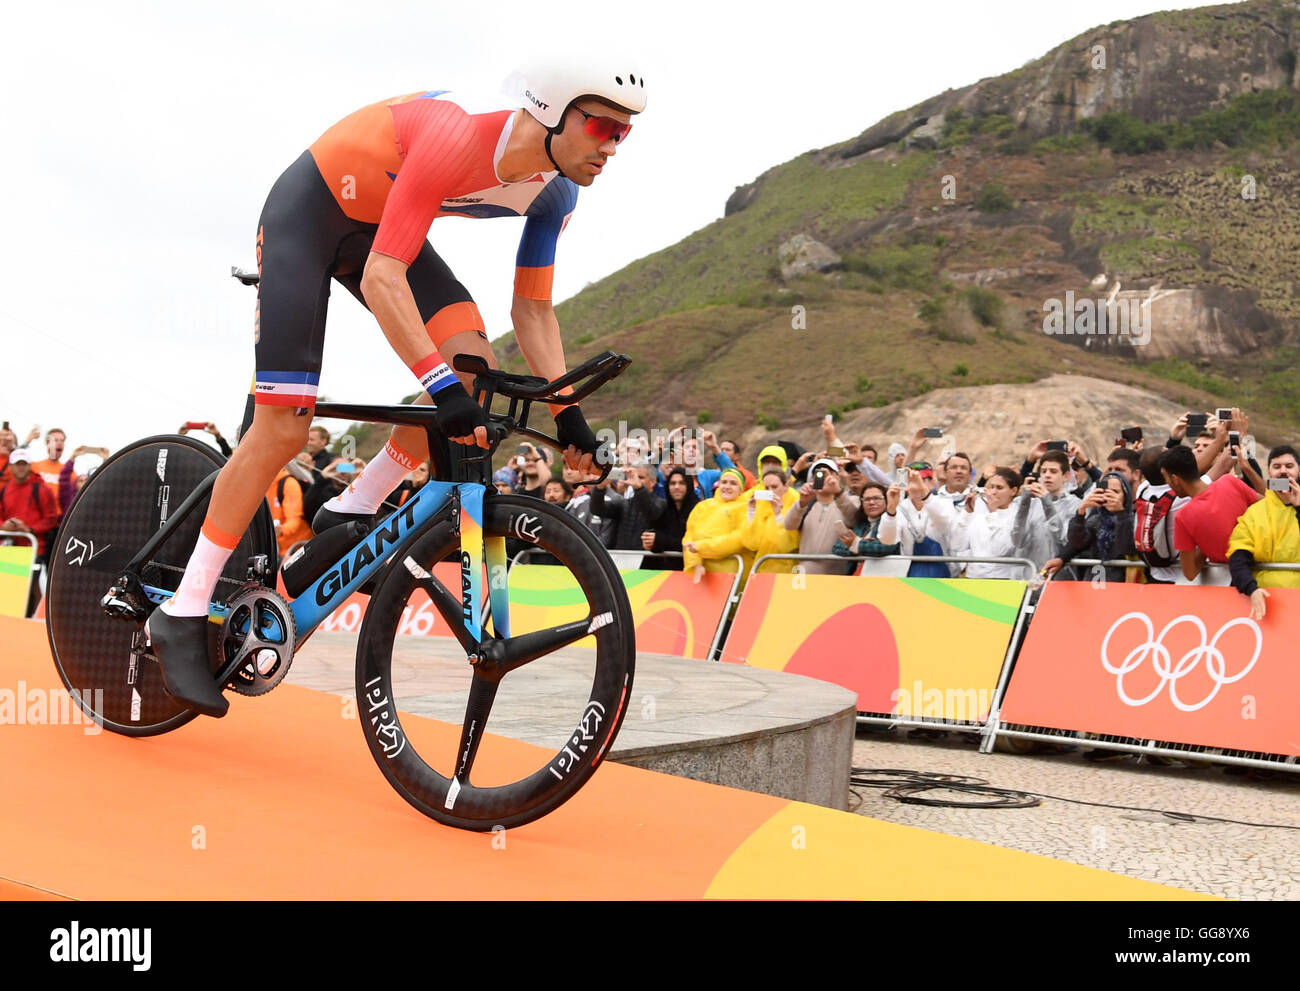 Rio de Janeiro, Brazil. 10th Aug, 2016. Tom Dumoulin of the Netherlands at the start of the men's Individual Time Trial of the Rio 2016 Olympic Games Road Cycling events at Pontal in Rio de Janeiro, Brazil, 10 August 2016. Photo: Sebastian Kahnert/dpa/Alamy Live News Stock Photo